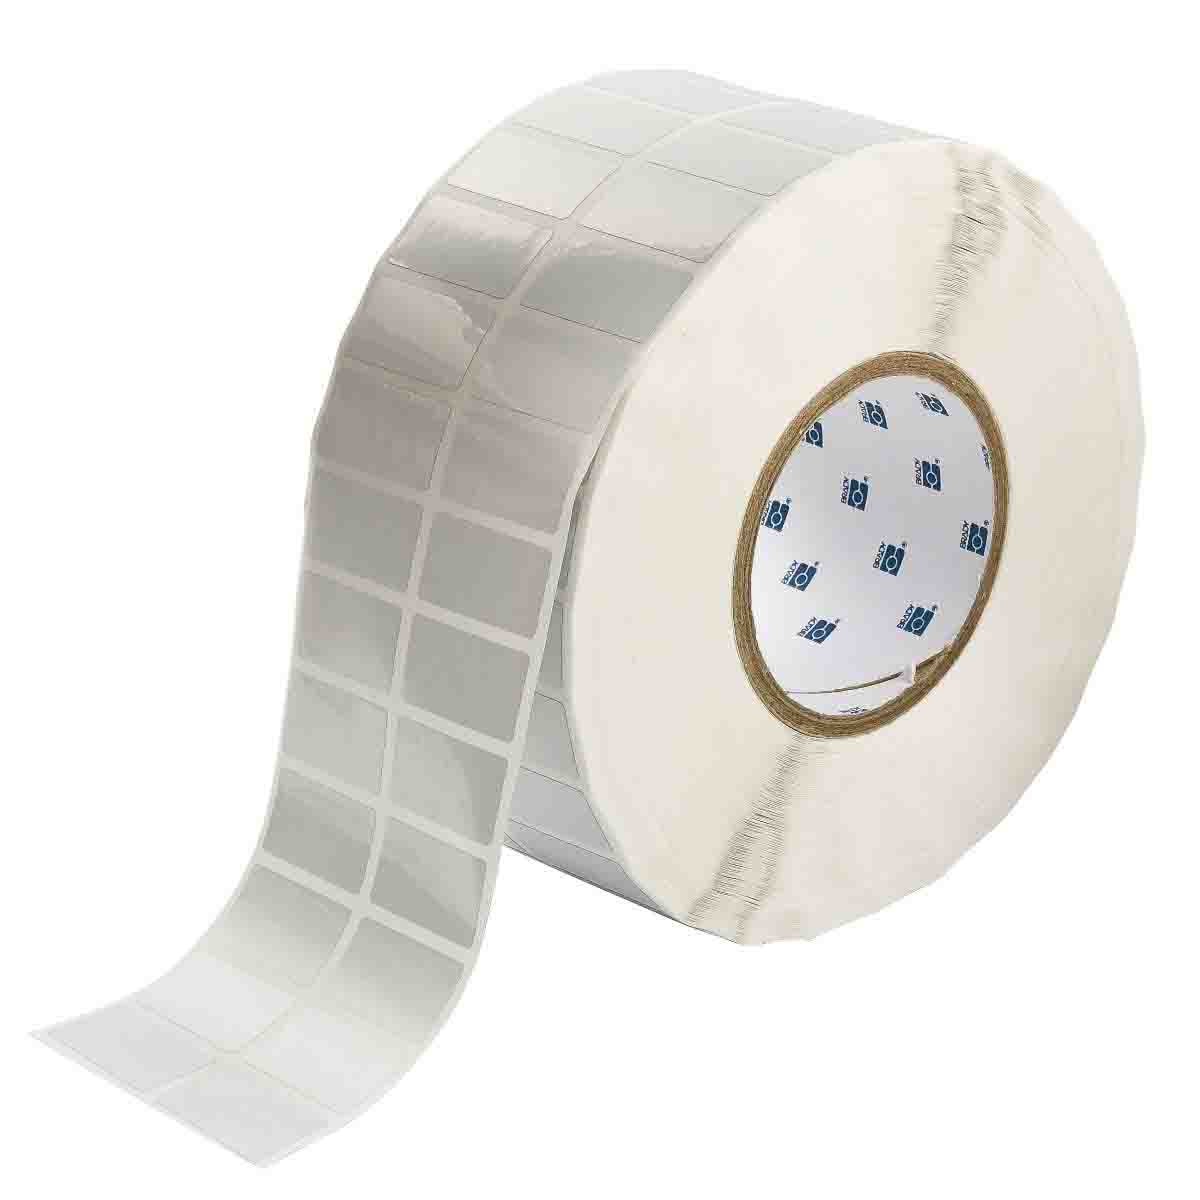 1,000 Labels per Roll, 1 Roll per Package Silver Brady THT-19-7576-1 Tamper-Evident Metallized Polyester Thermal Transfer Printable Labels